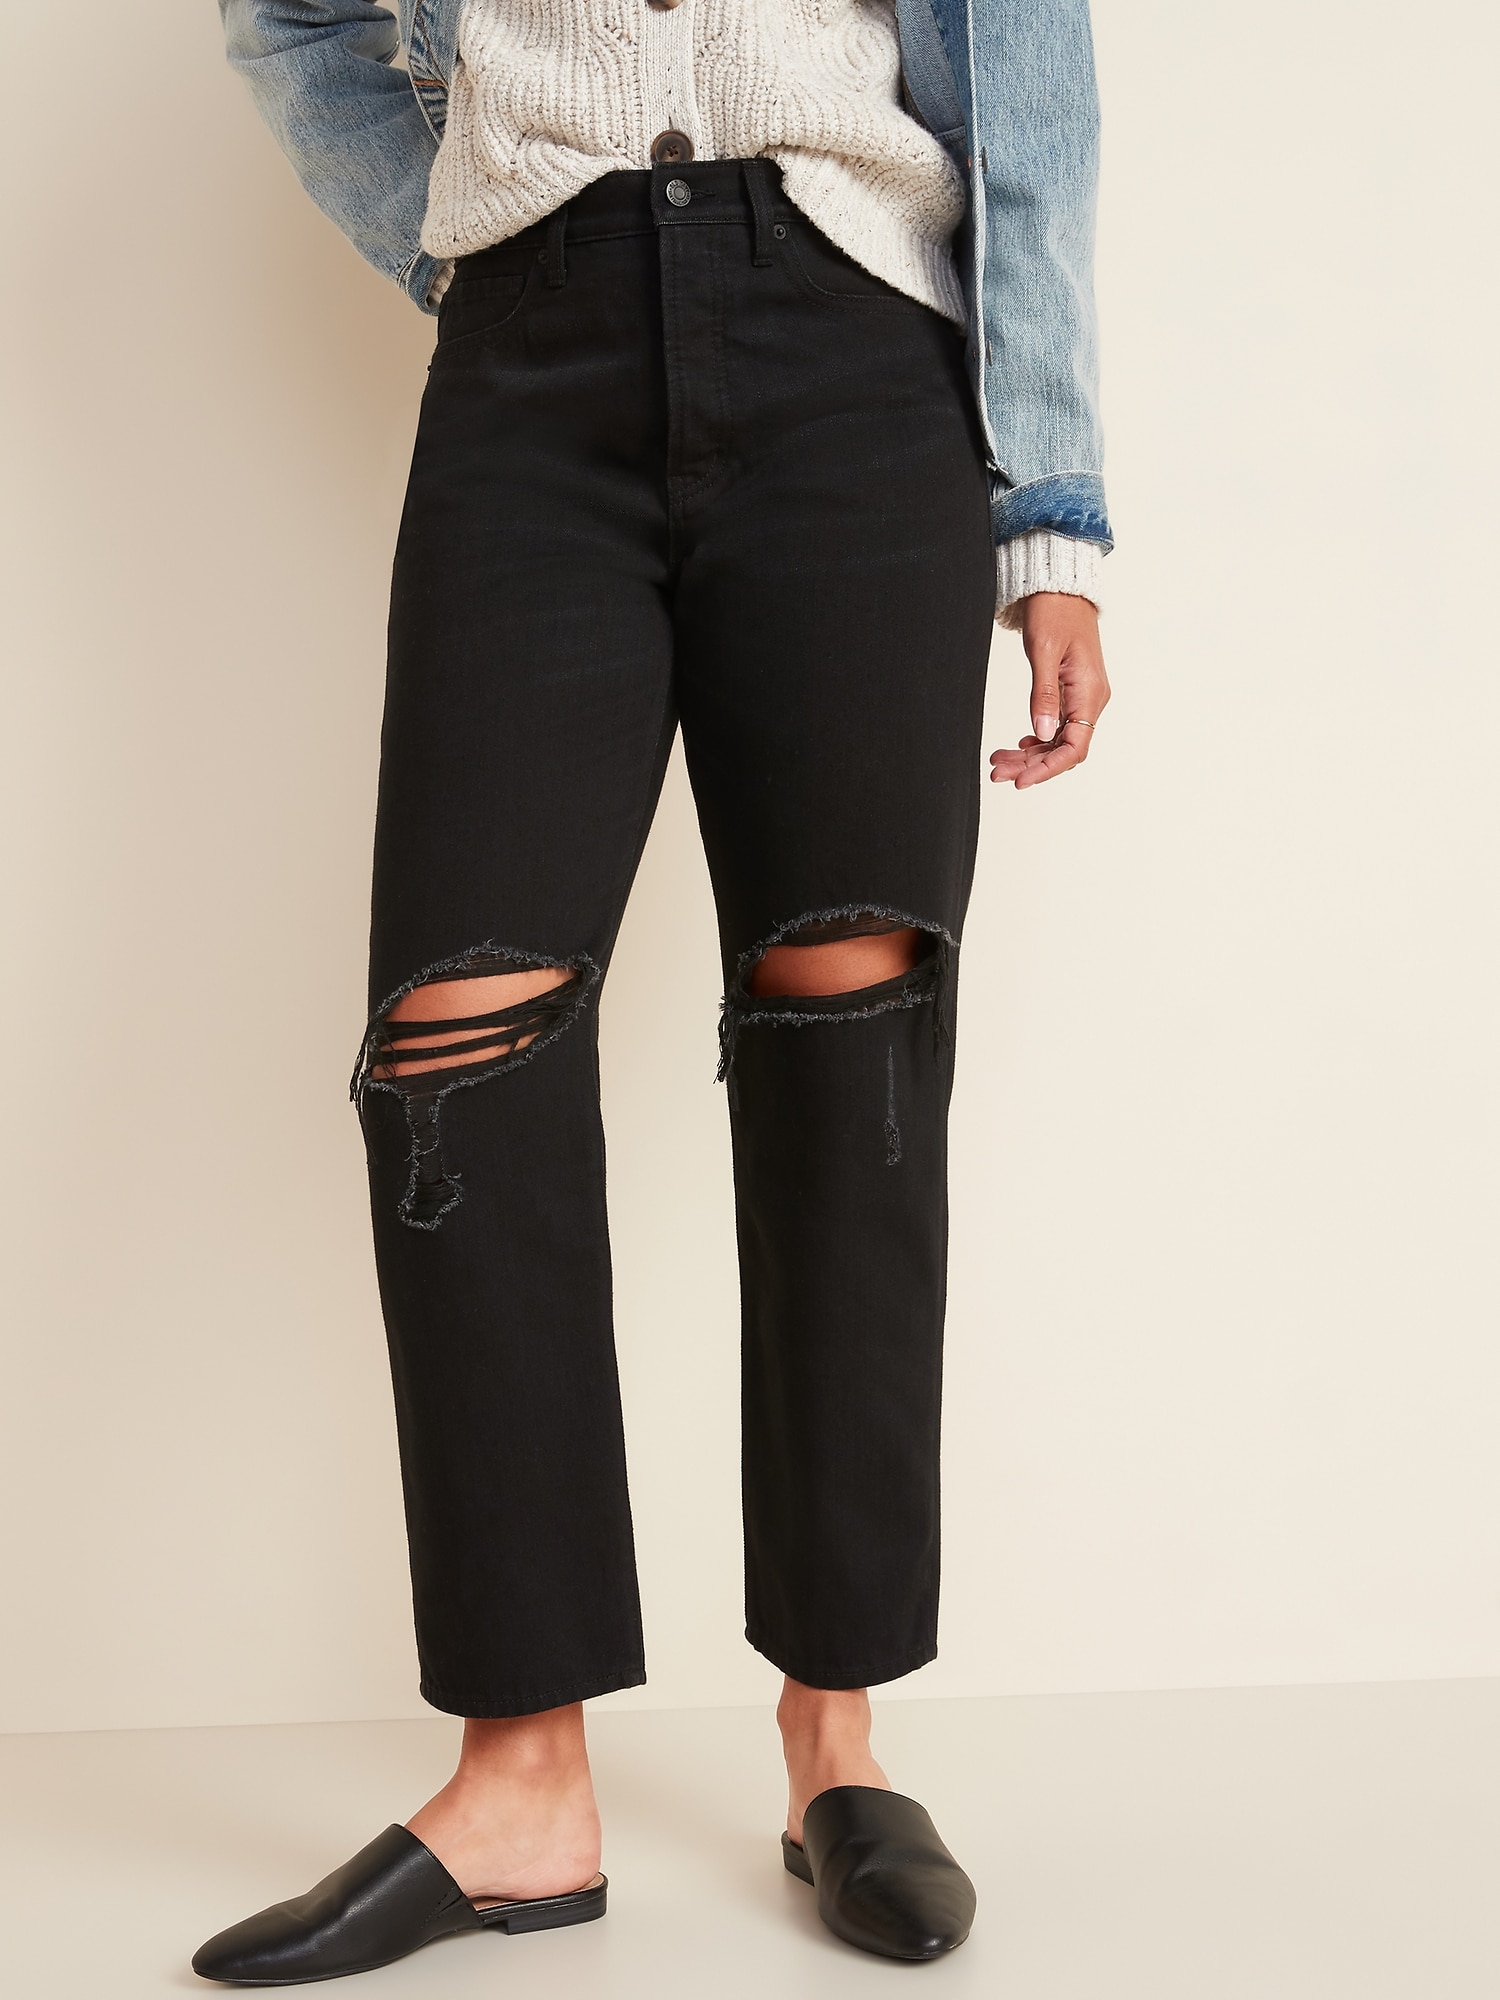 old navy high waisted black jeans